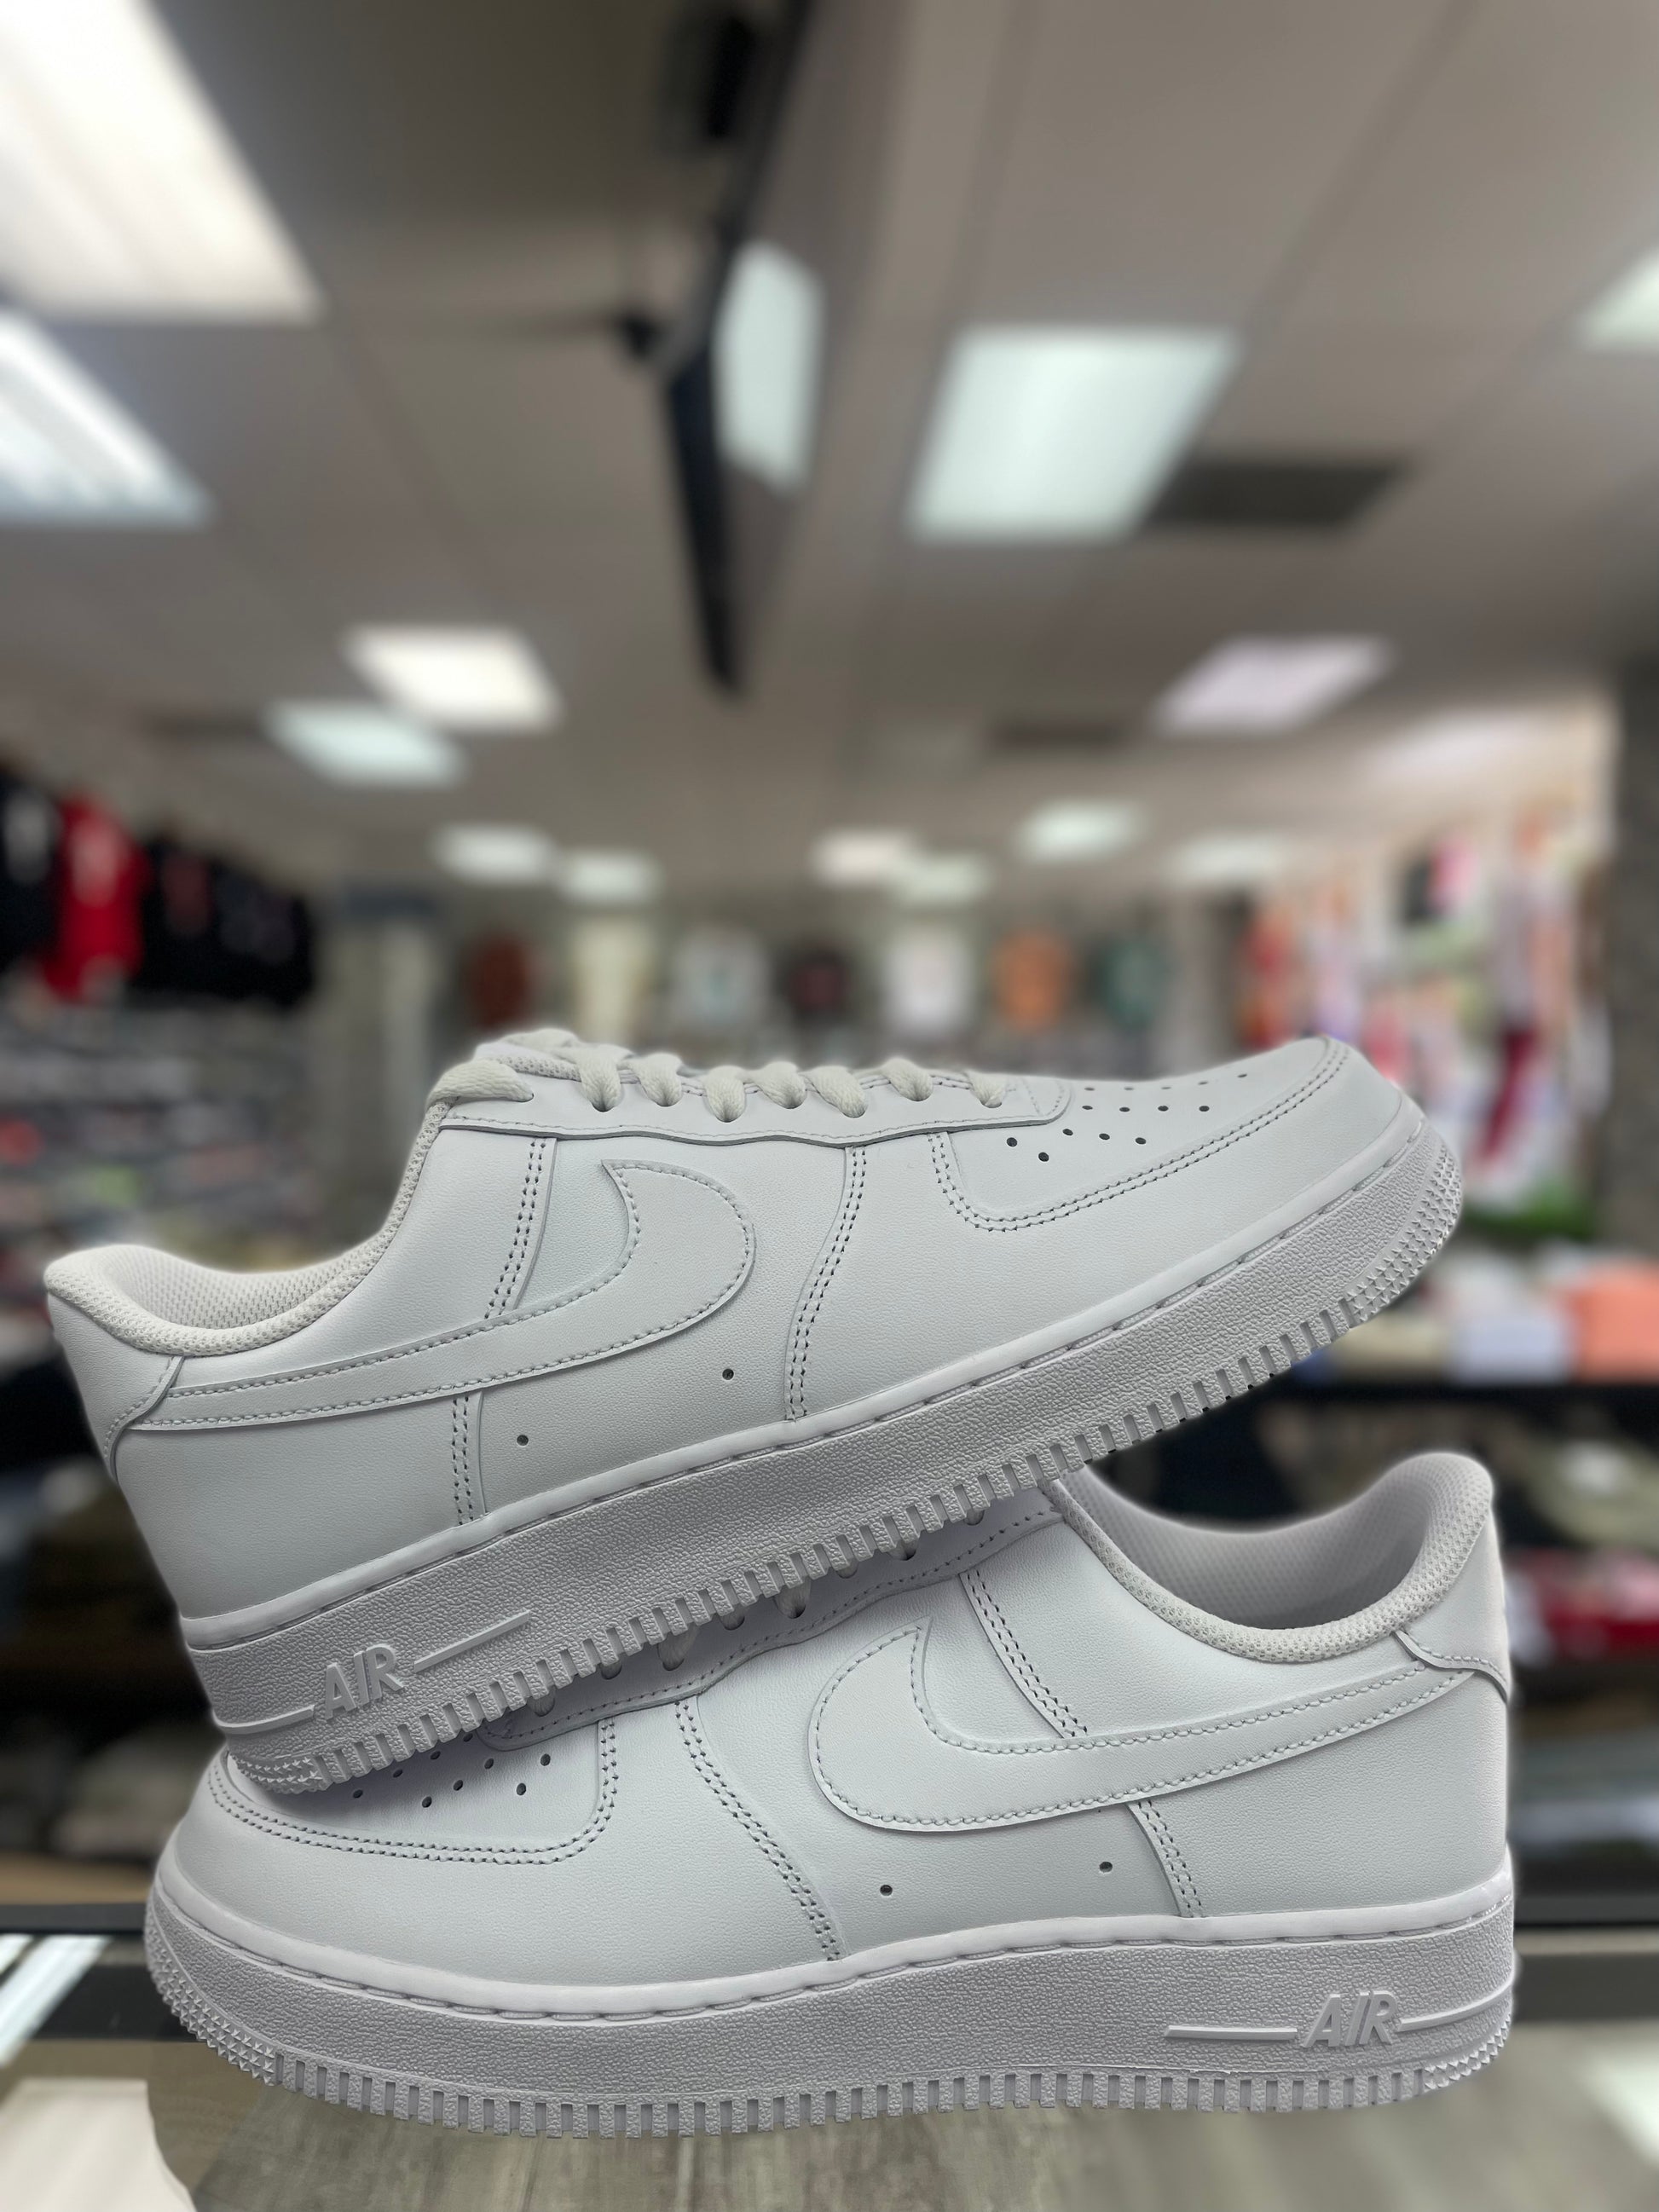 Size+11.5+-+Nike+Air+Force+1+Low+x+OFF-WHITE+The+Ten+2017 for sale online